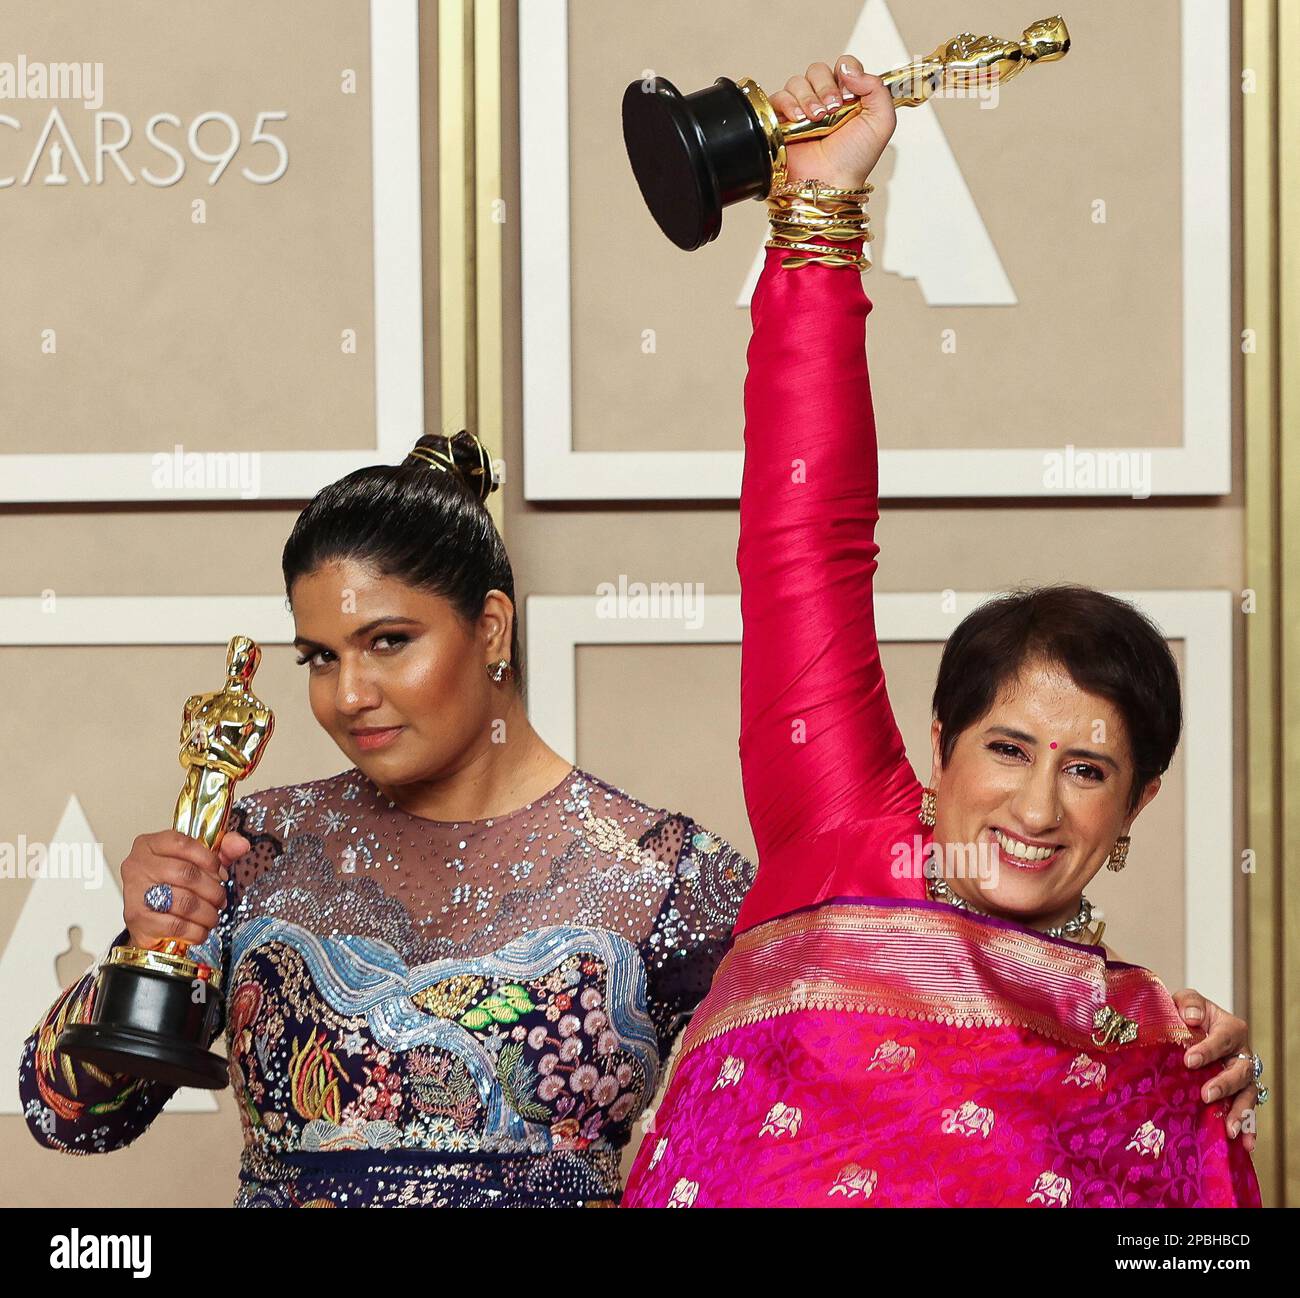 Kartiki Gonsalves and Guneet Monga pose with the Oscar for Best Documentary Short Film for 'The Elephant Whisperers' in the Oscars photo room at the 95th Academy Awards in Hollywood, Los Angeles, California, U.S., March 12, 2023. REUTERS/Mike Blake Stock Photo